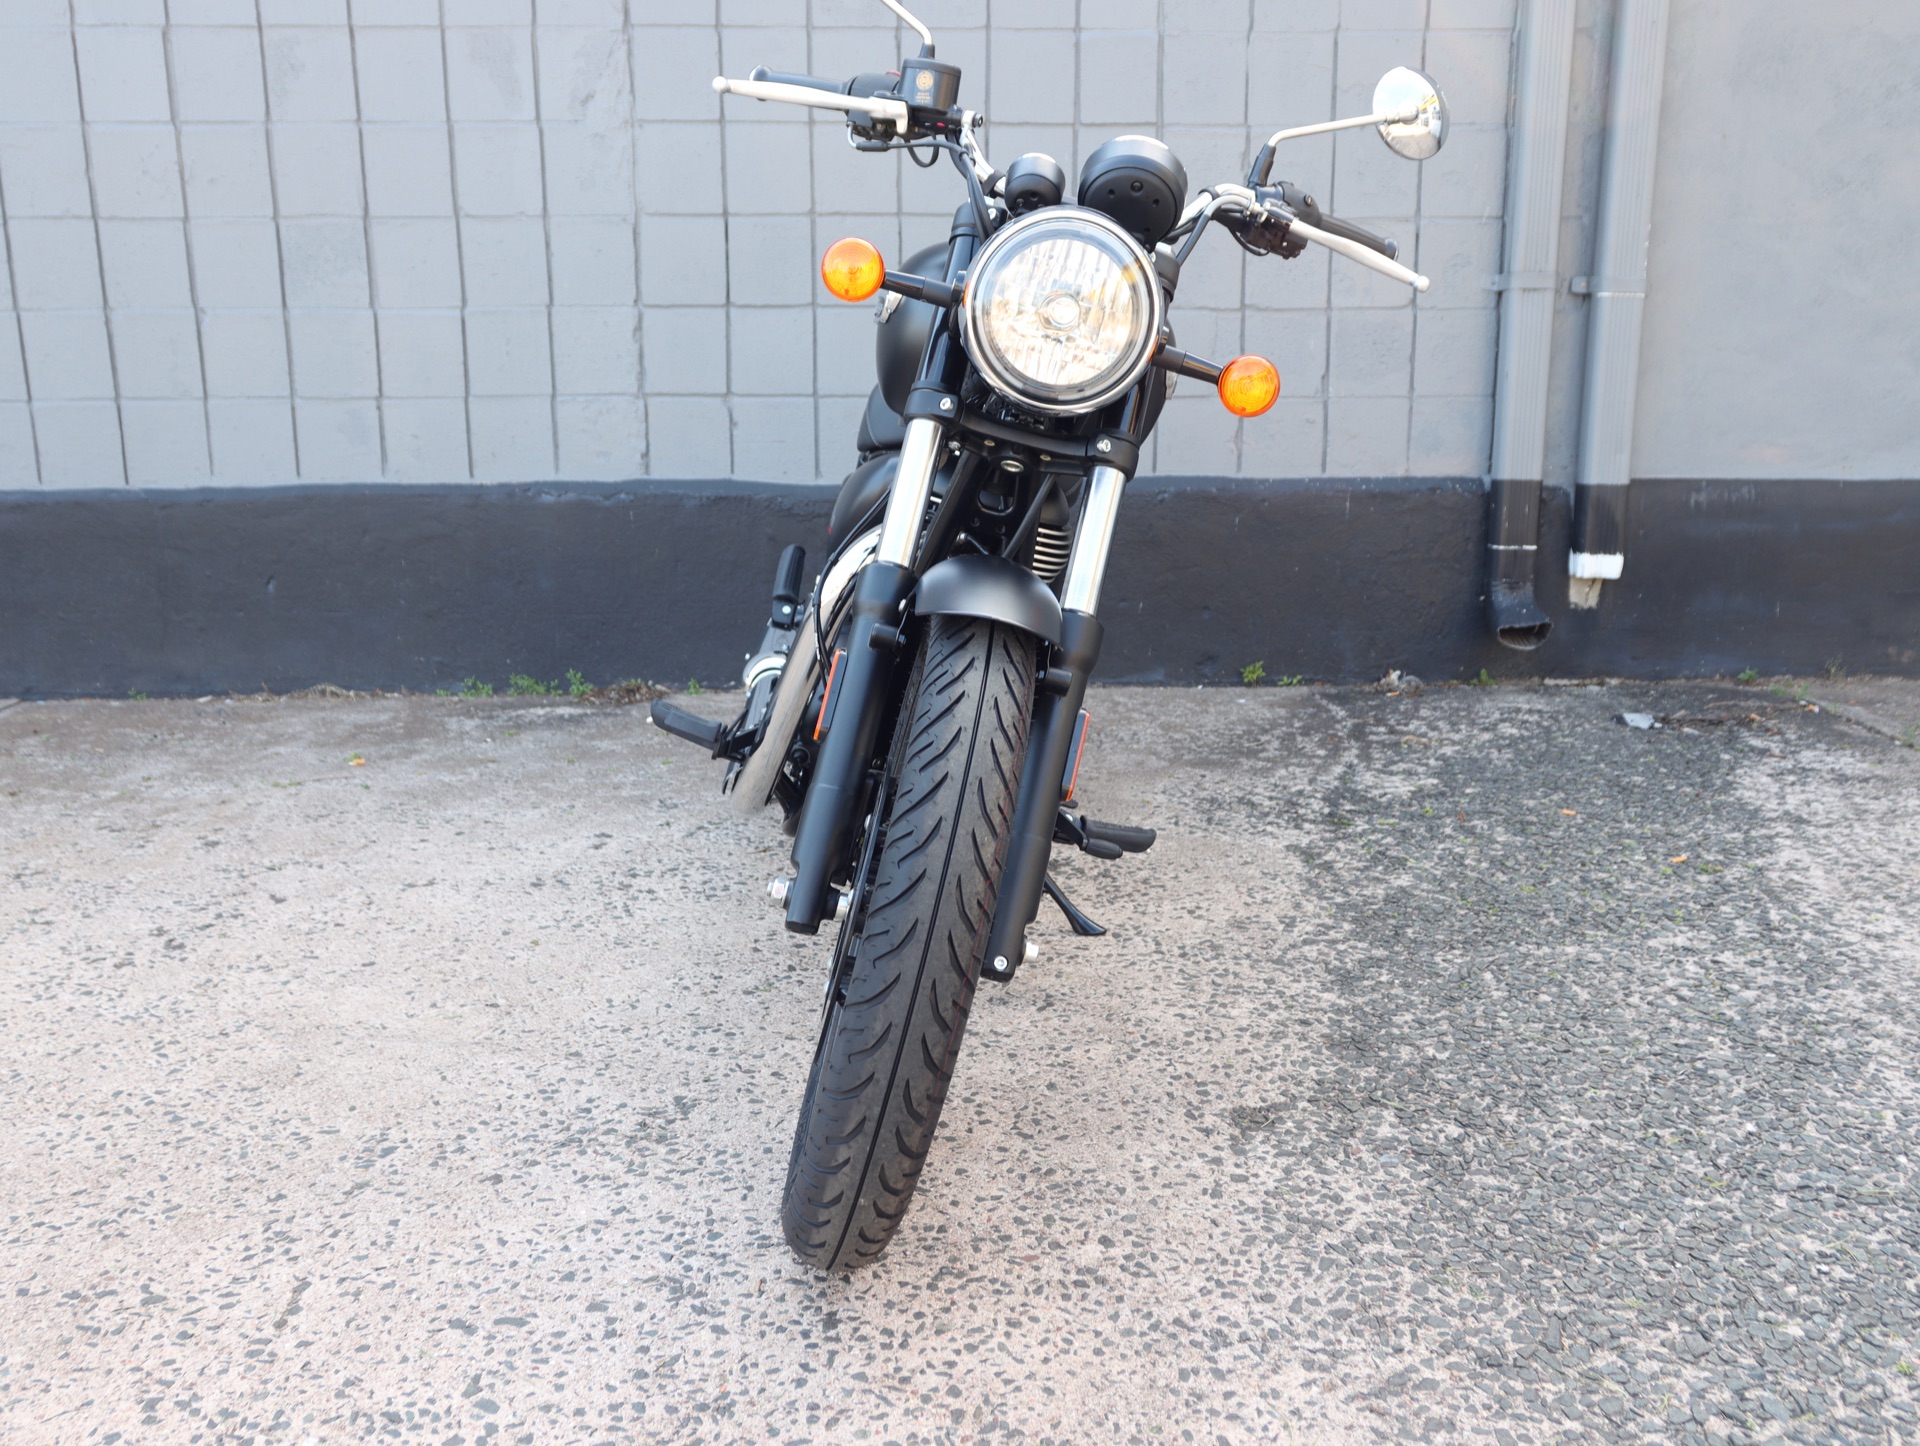 2022 Royal Enfield Meteor 350 in Enfield, Connecticut - Photo 8